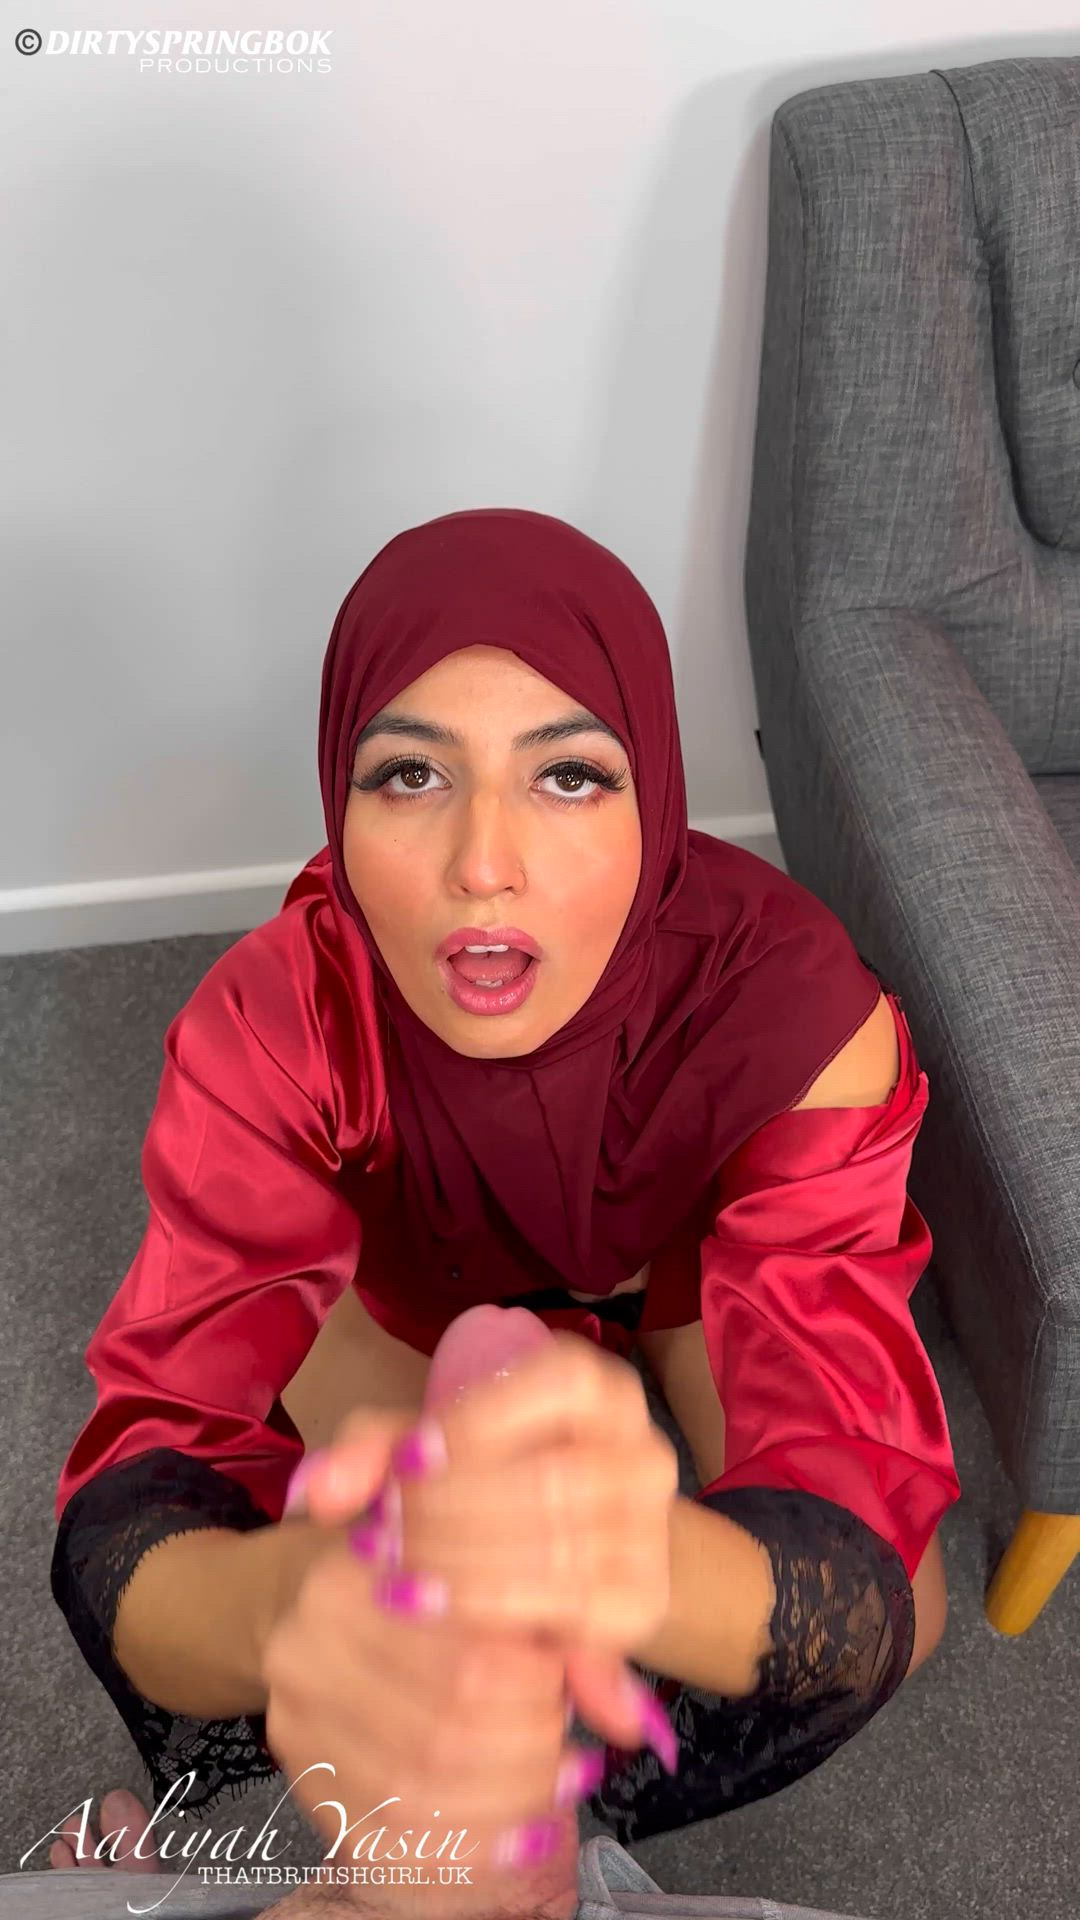 Aaliyah Yasin porn video with onlyfans model ThatBritishGirl <strong>@thatbritishgirl</strong>